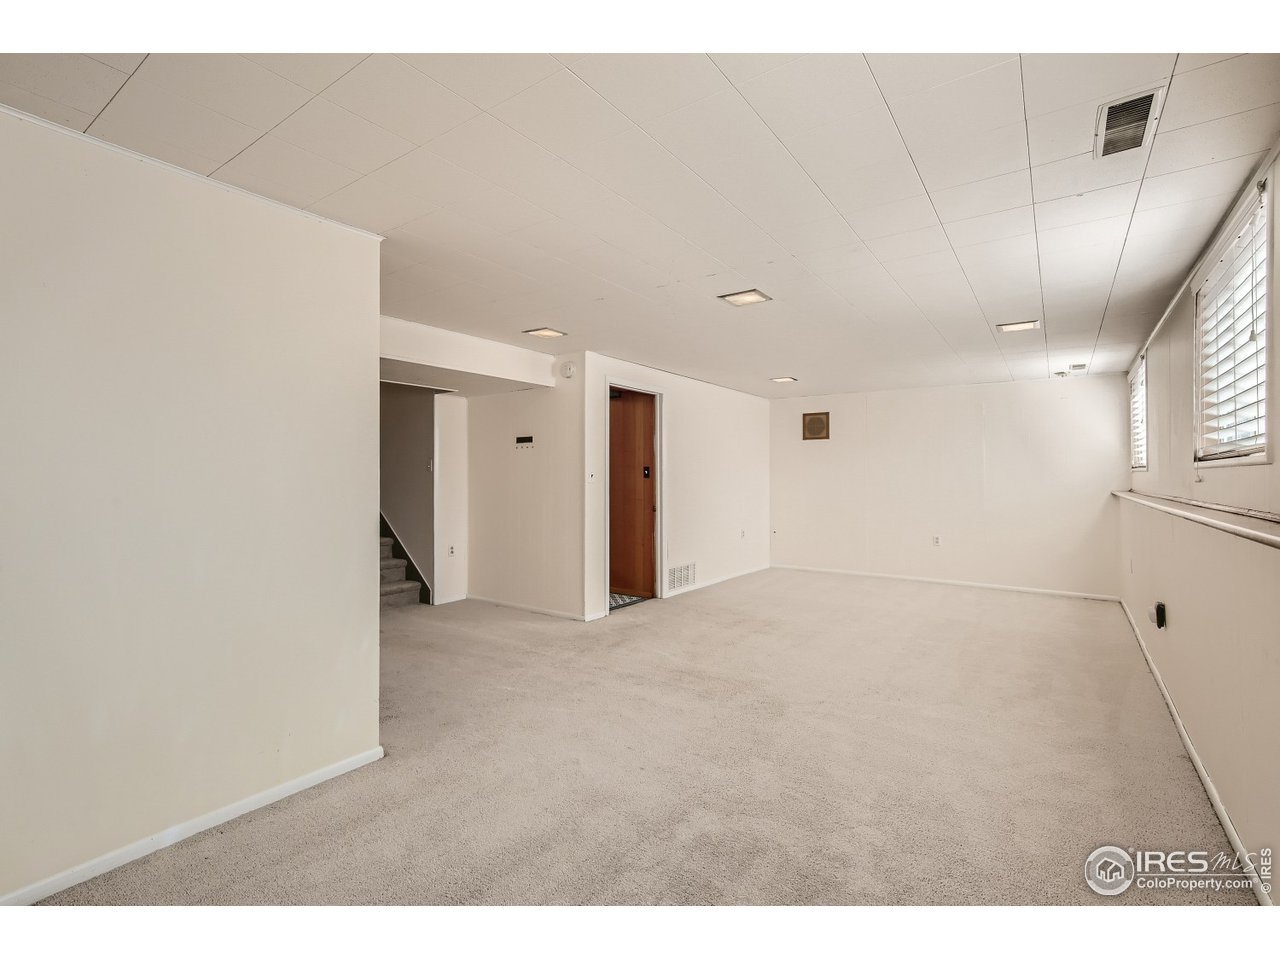 Spacious basement looking opposite to stairs up and utility, washer and dryer, storage room.